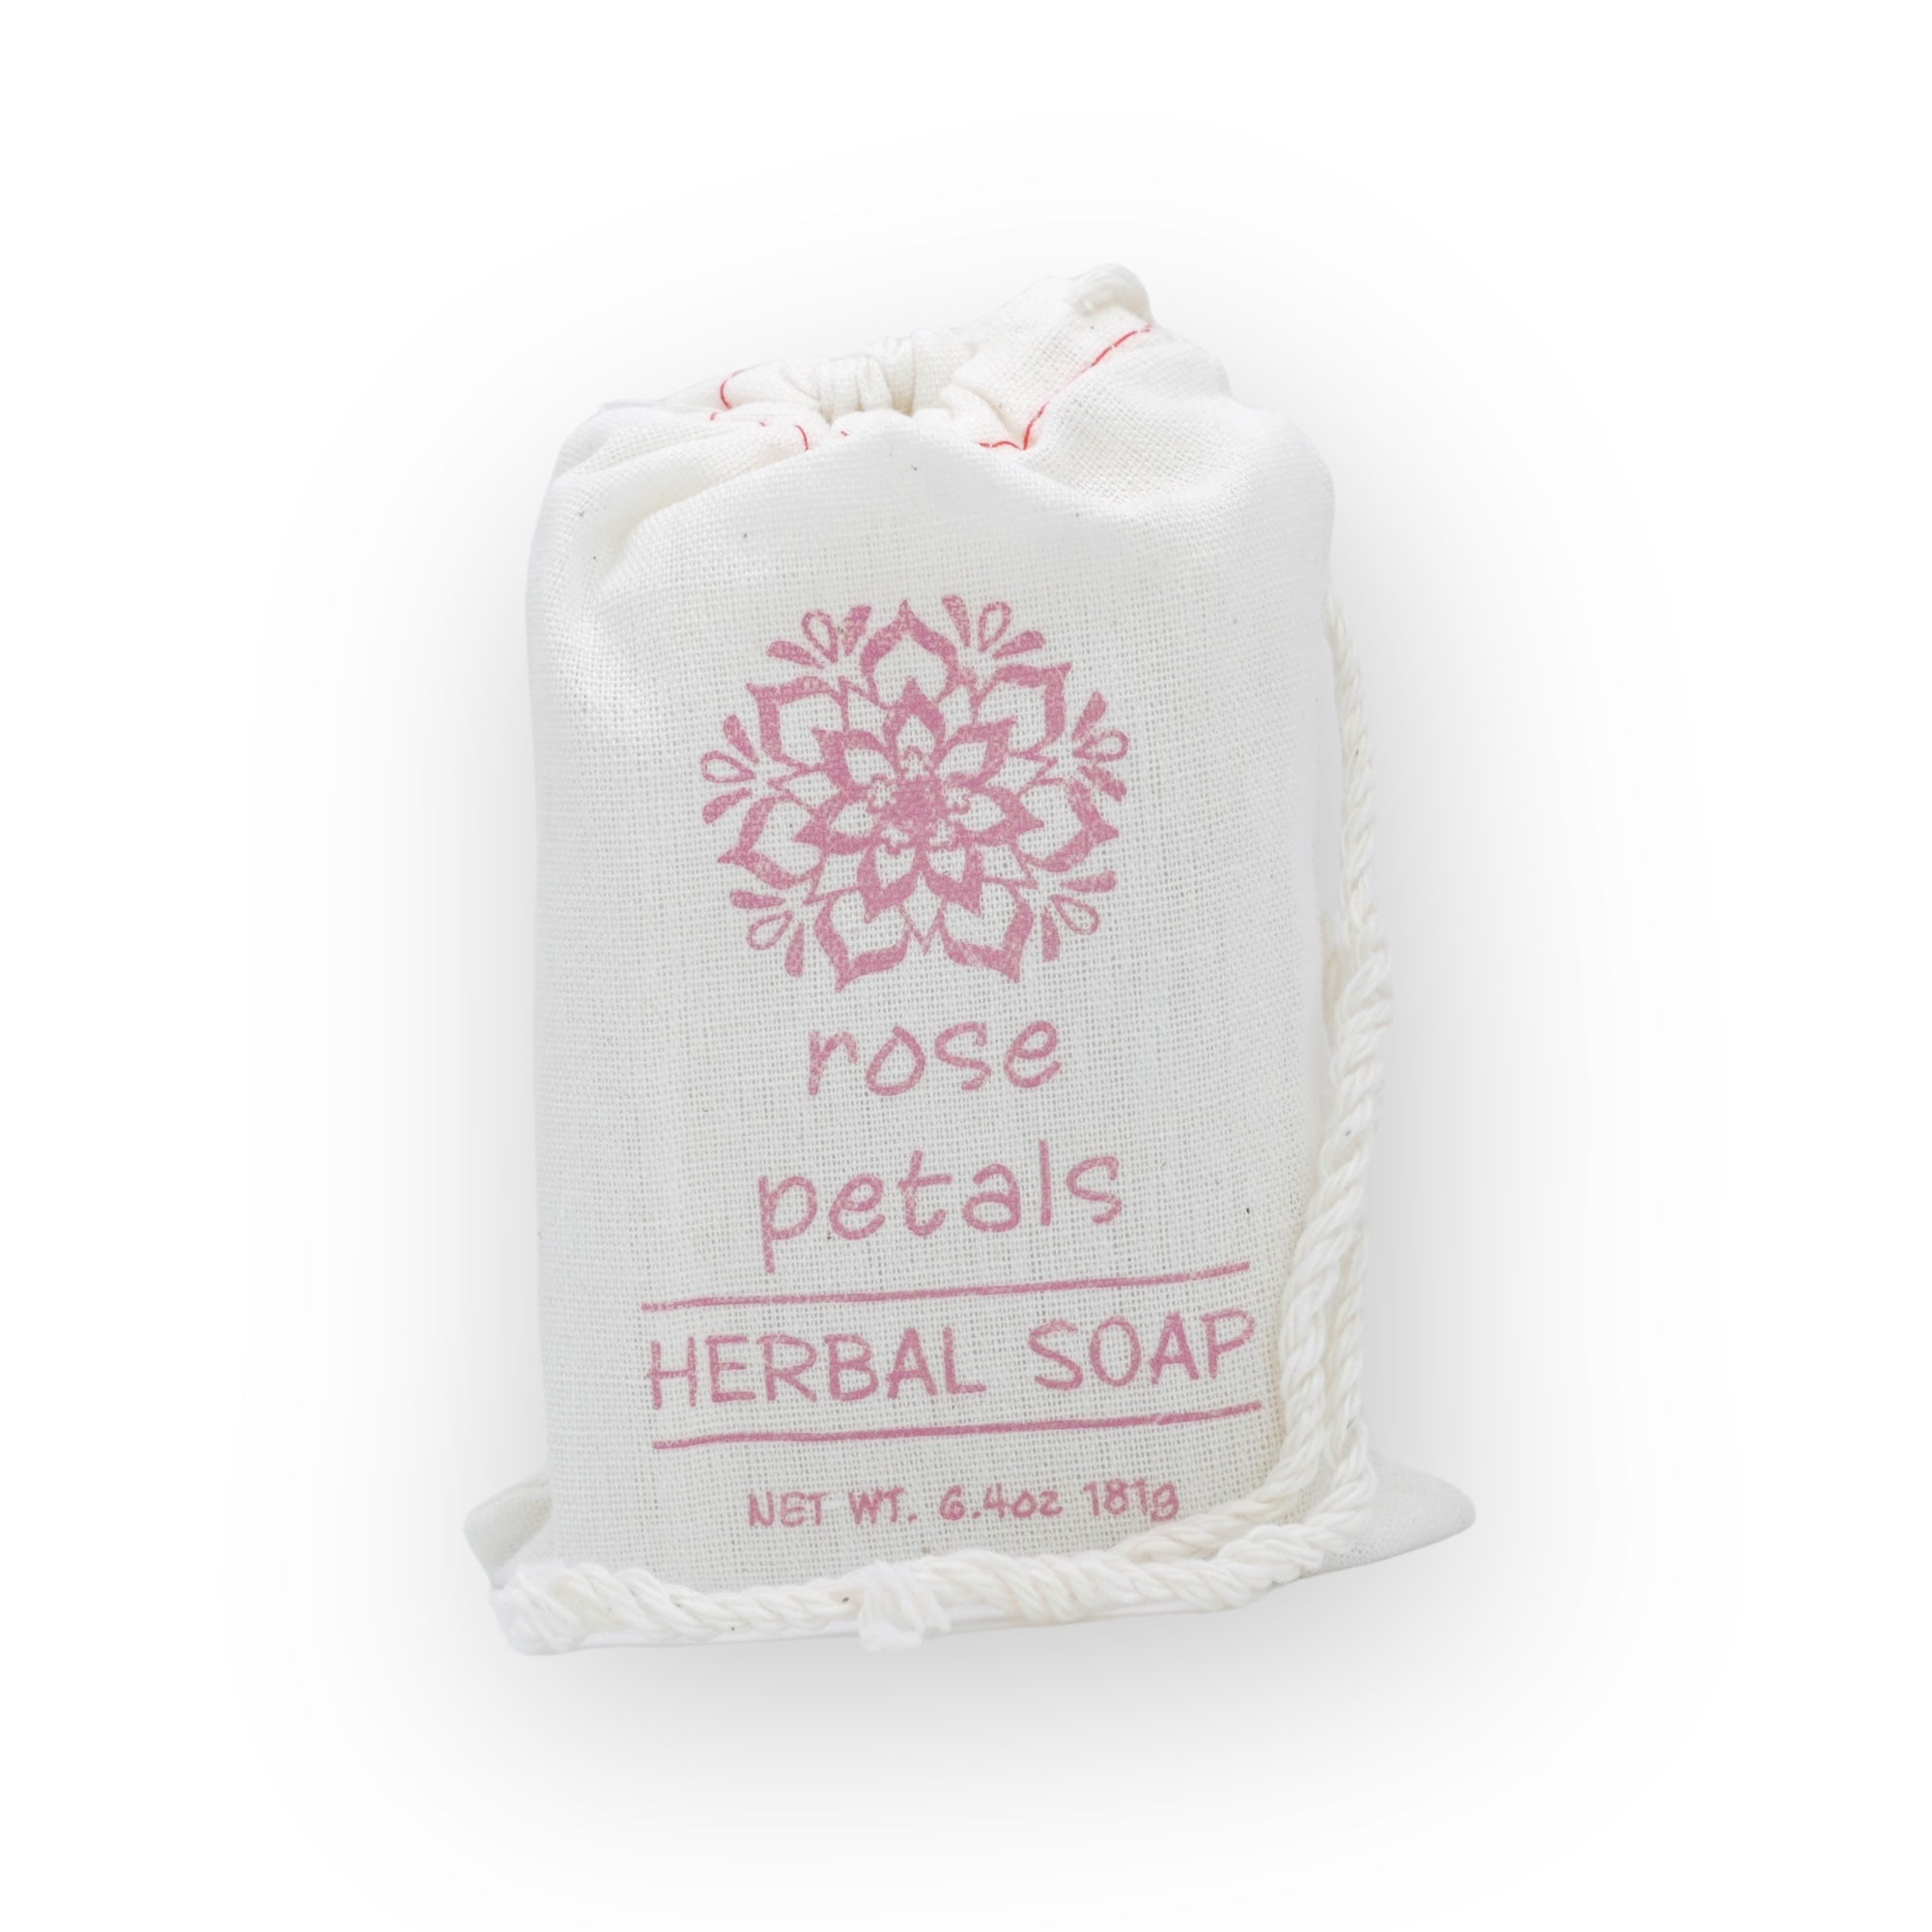 Rose Petals Herbal Soap by Greenwich Bay Trading Co.